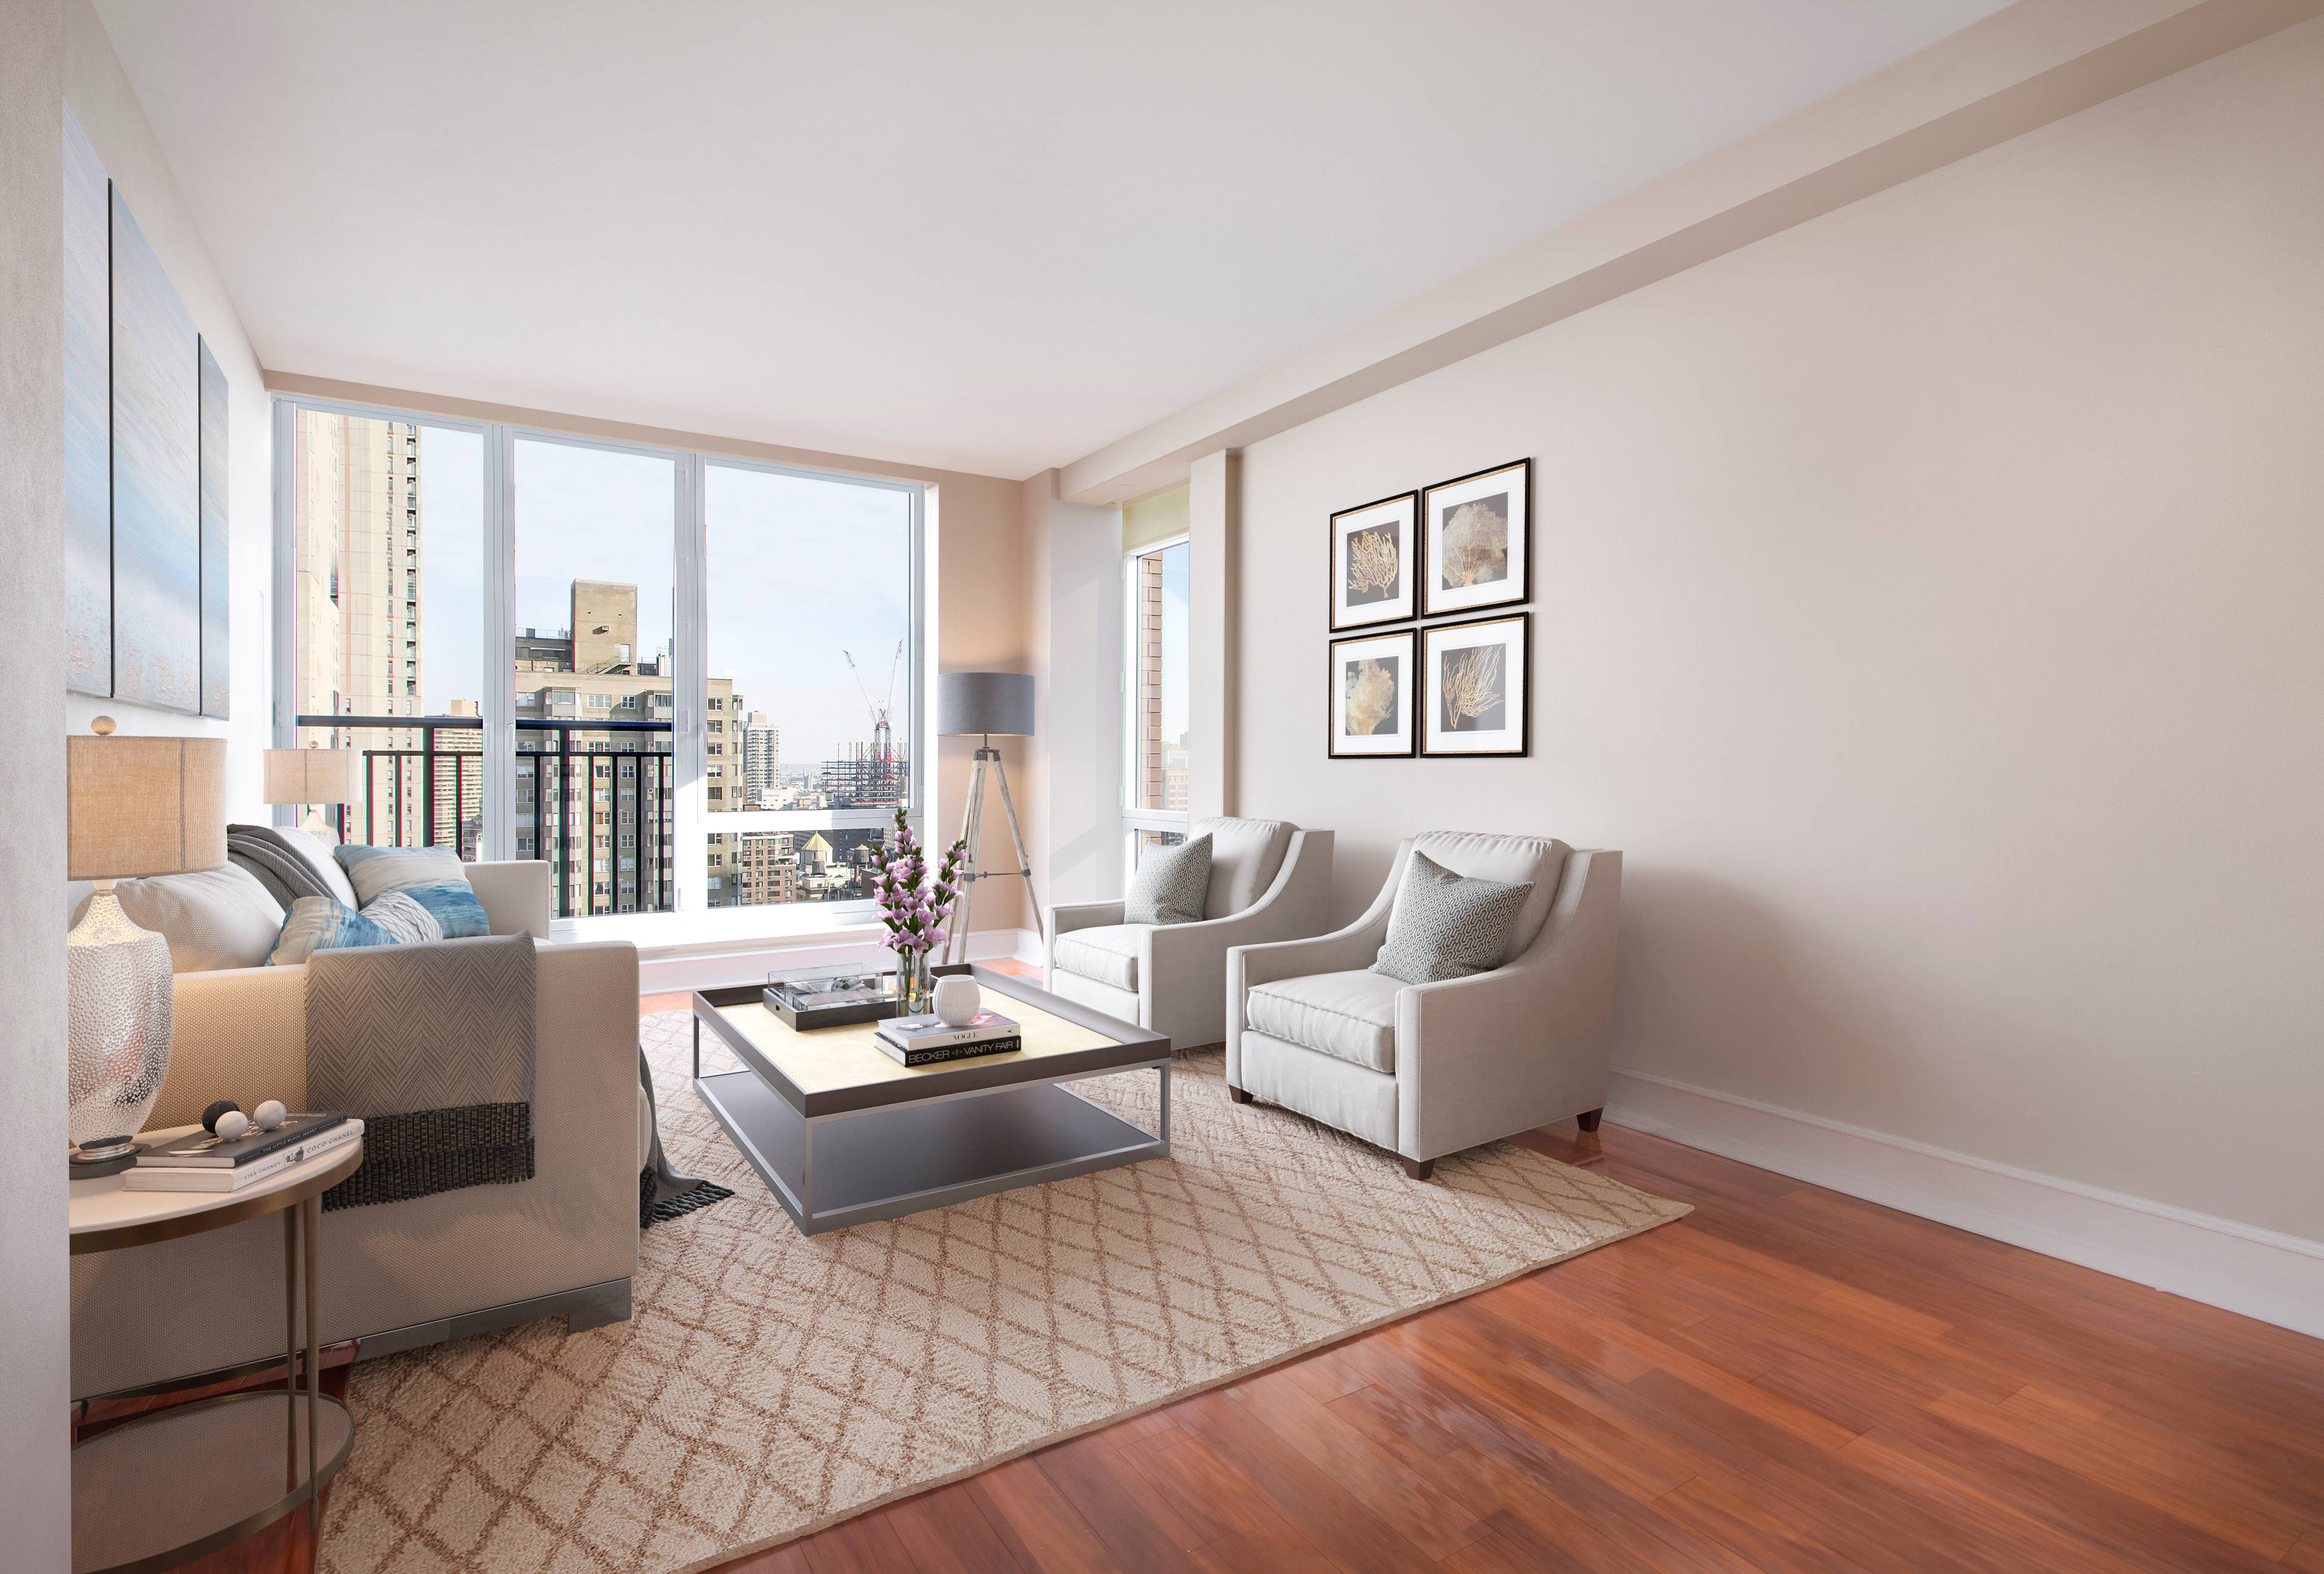 Welcome Home to the highest floor 1Bedroom available at 45 Park Avenue.